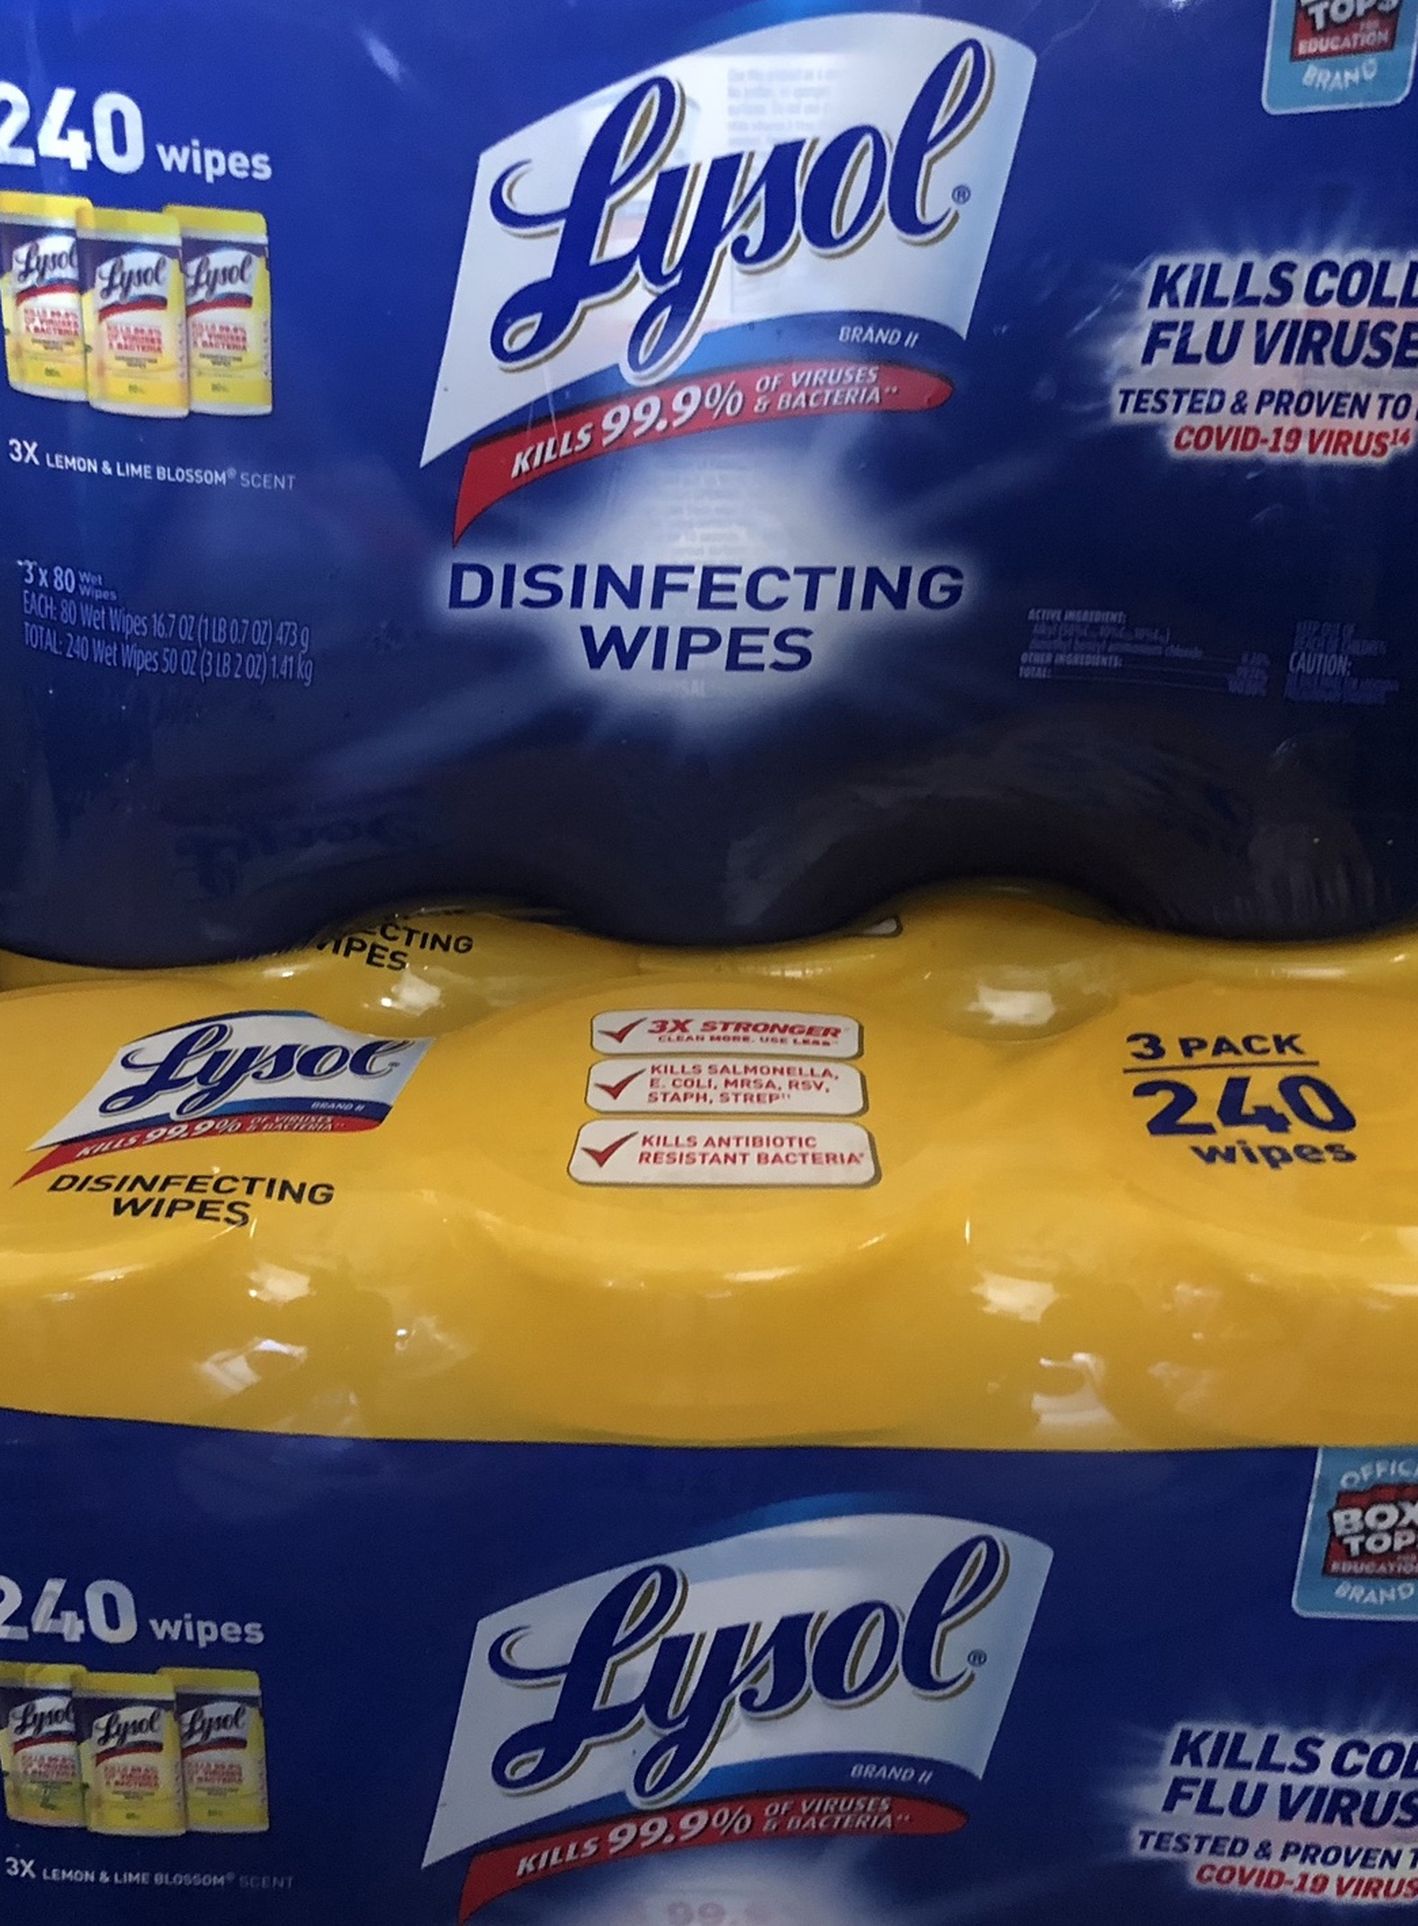 Lysol “3PACK”